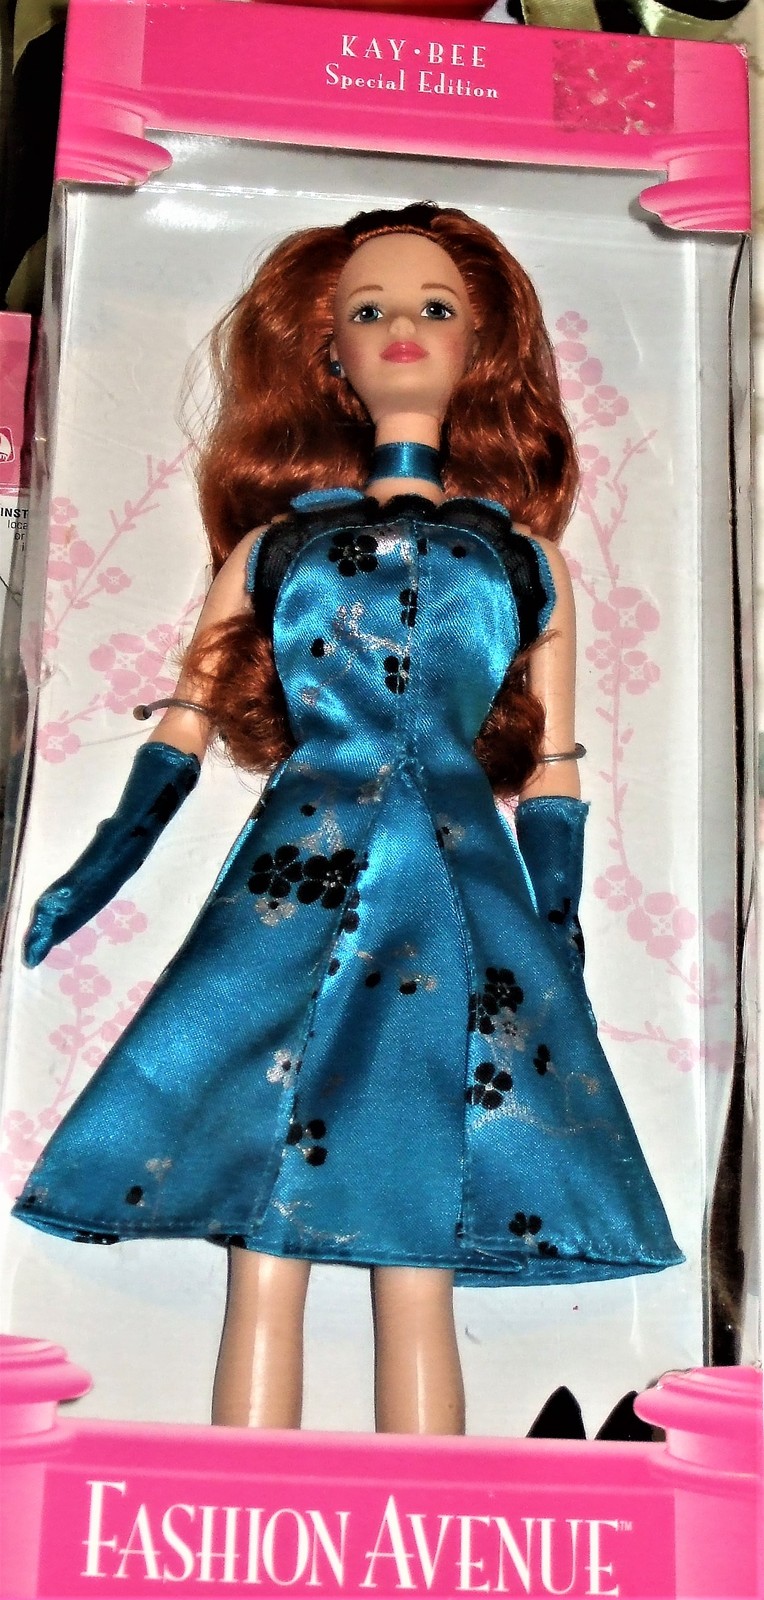  Barbie Doll - FASHION AVENUE Barbie Kay-Bee Special Edition Long Red Hair 1968 - $35.00